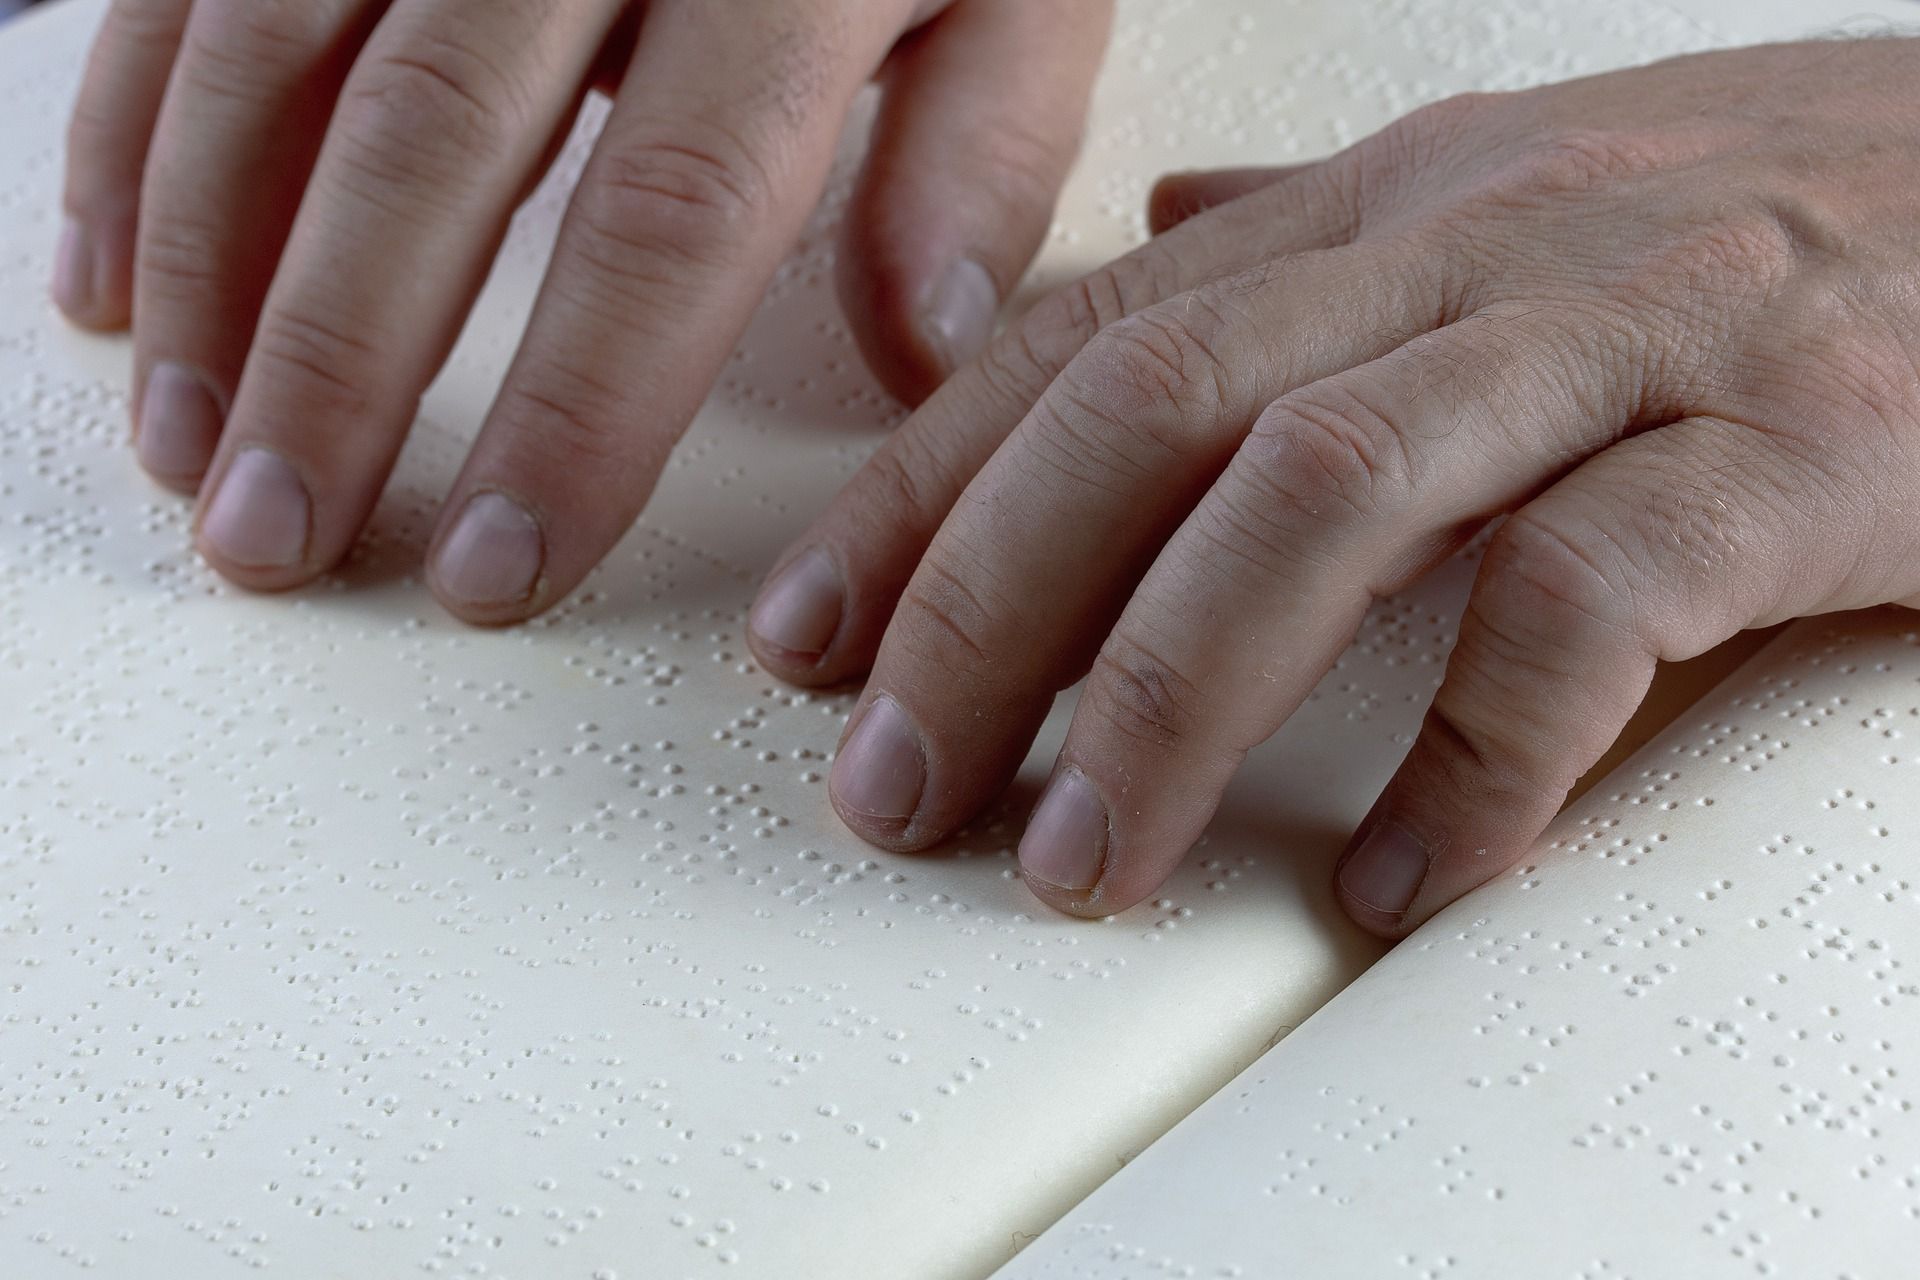 A person has their fingers placed on a page of Braille text to read